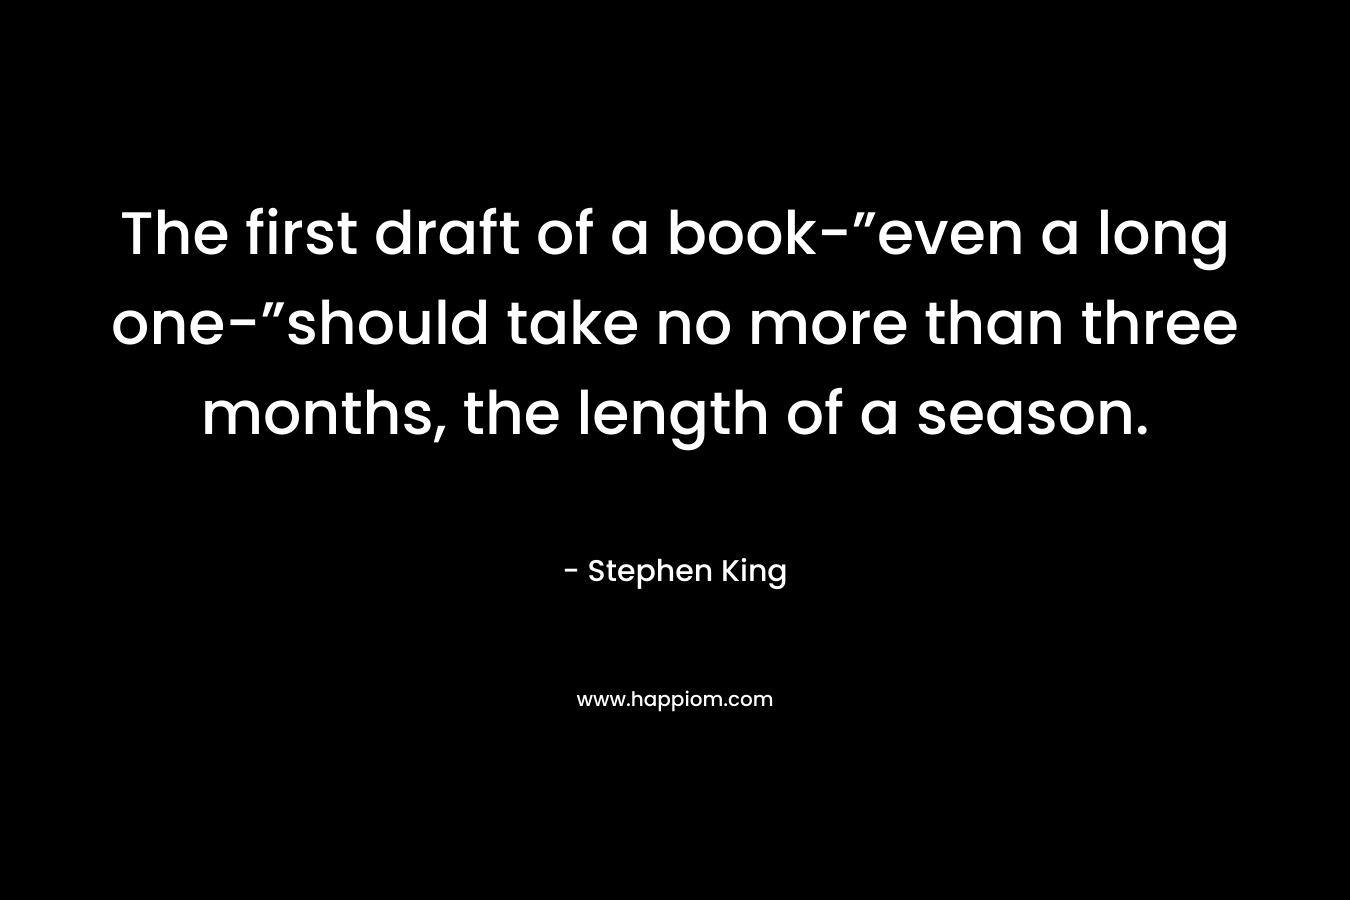 The first draft of a book-”even a long one-”should take no more than three months, the length of a season. – Stephen King